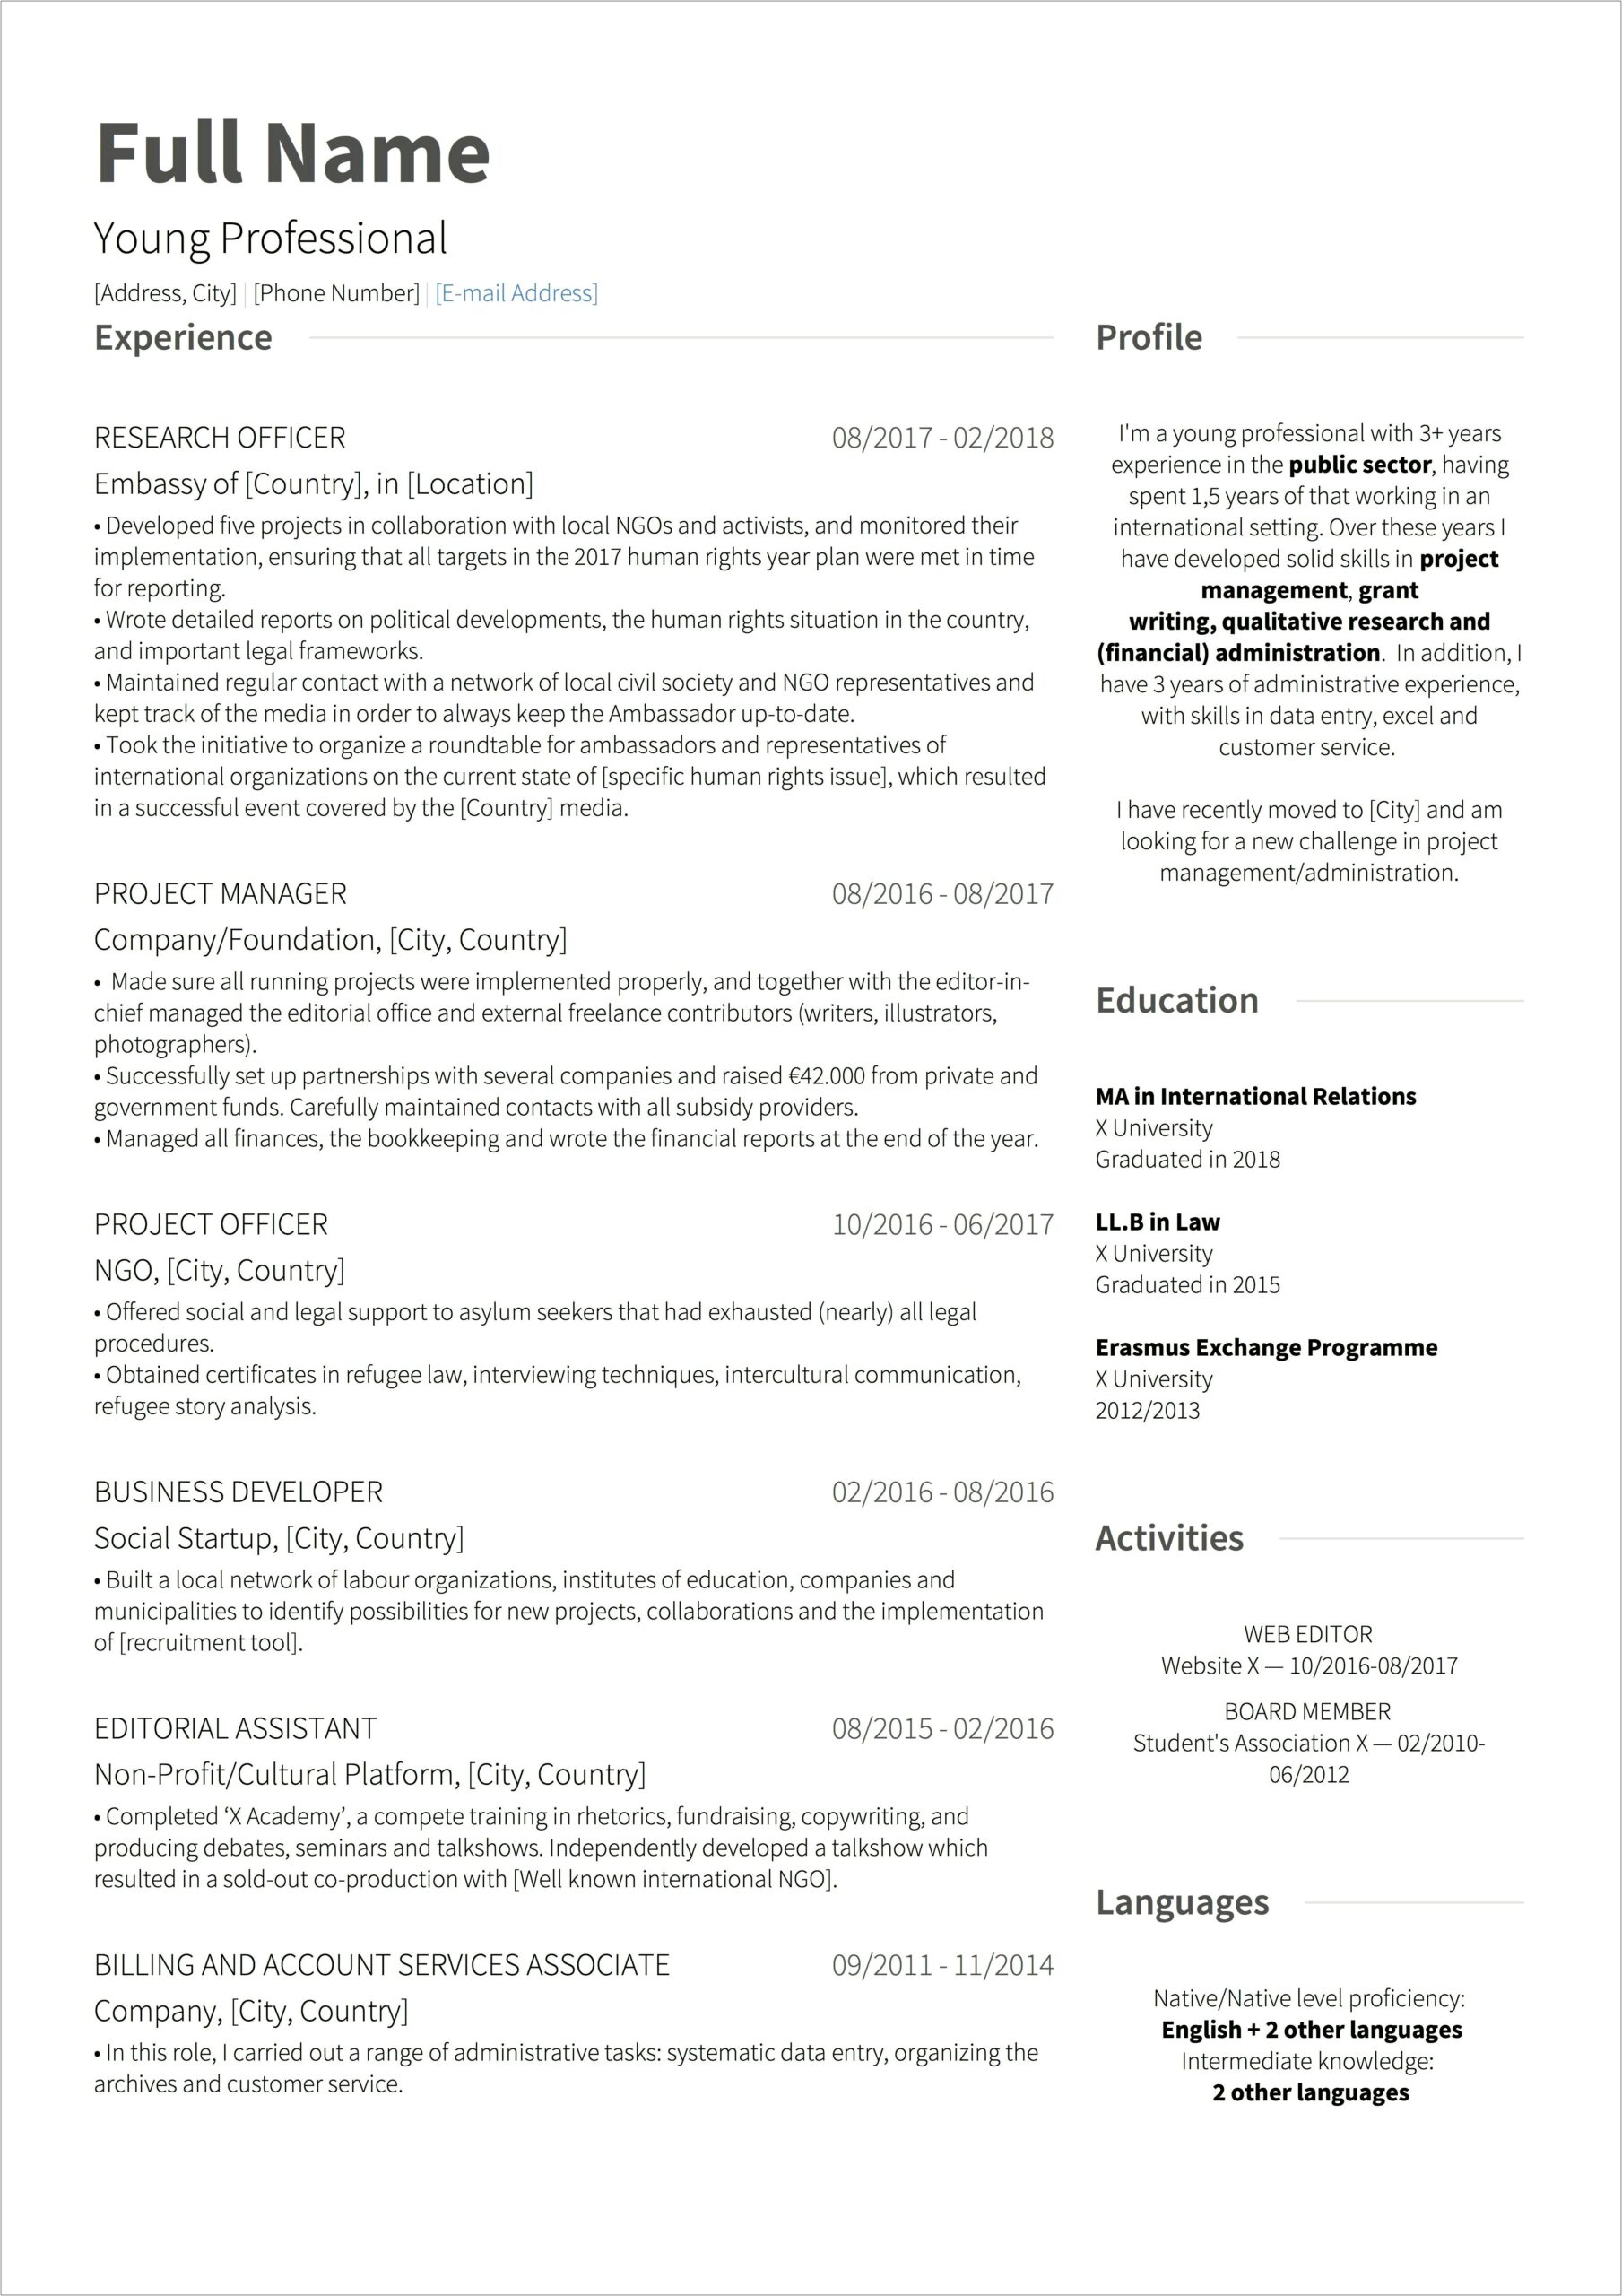 Resume For People With Work Gaps Reddit